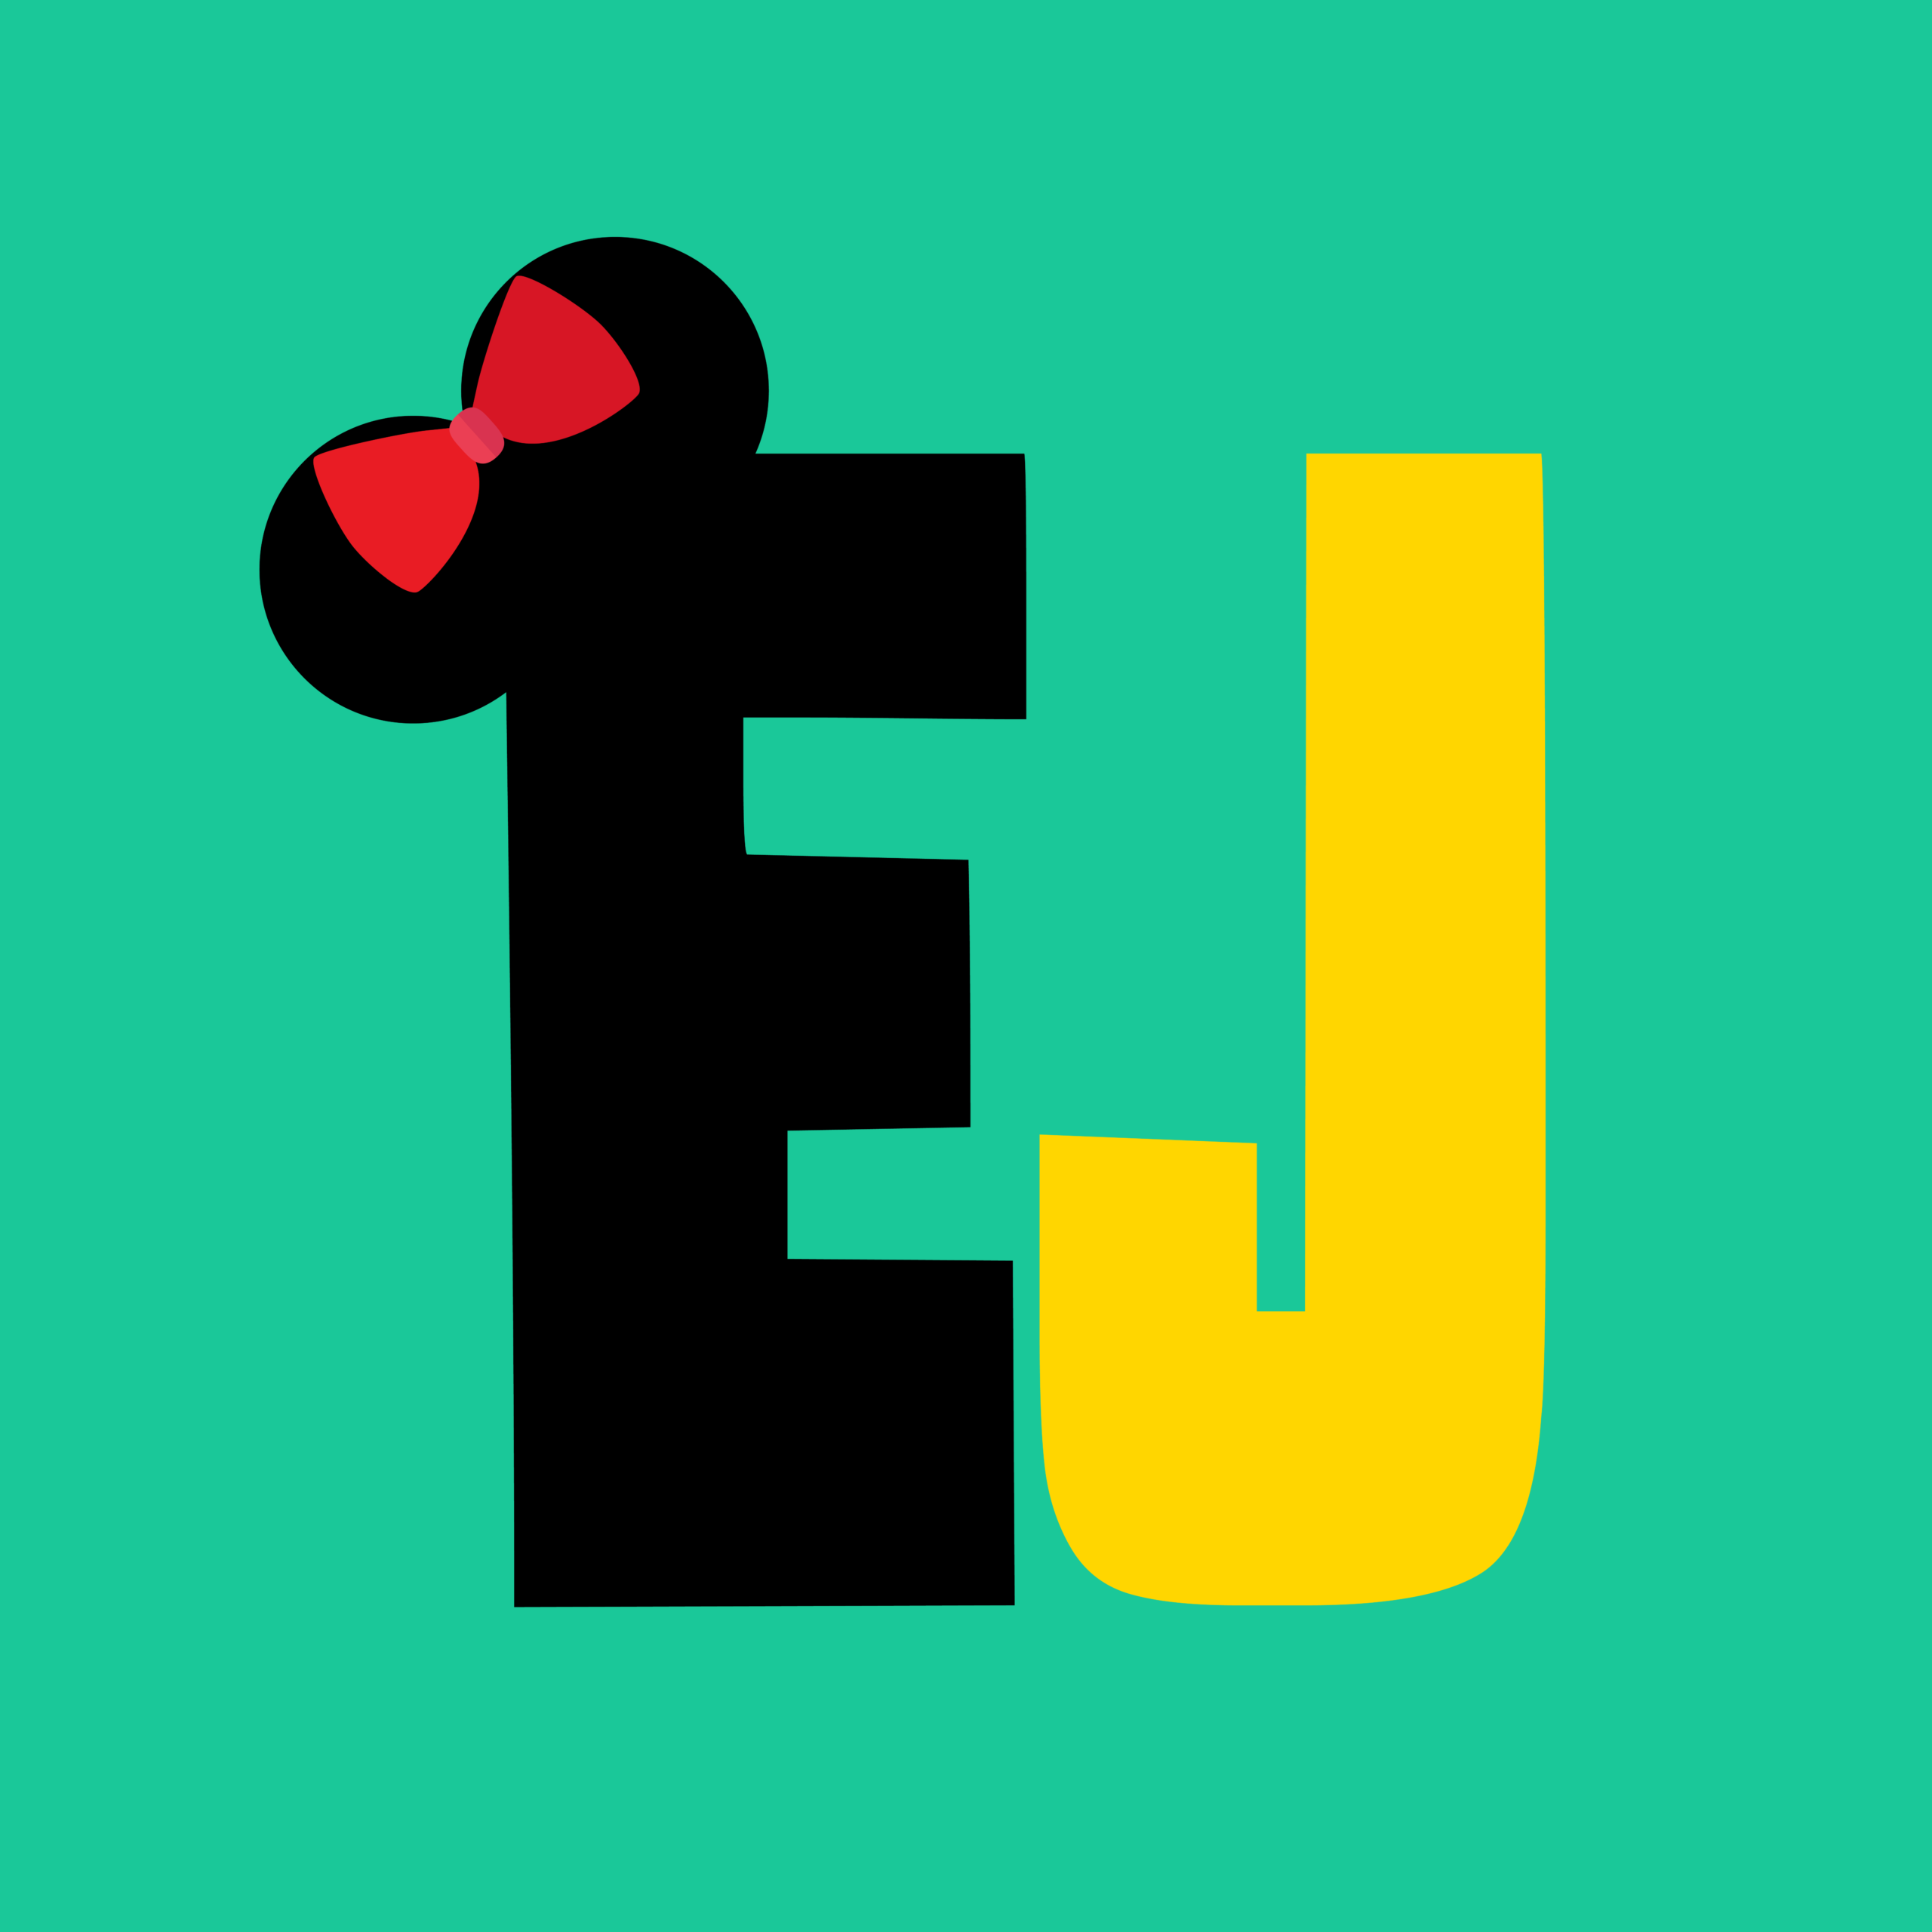 Inspired by the movie "The Shining," the branding for this Etsy shop, EarsJohnny!, plays off the phrase "Here's Johnny!" The shop creates Disney-inspired ears and other products. The logo design incorporates its own "Mickey Ears" and uses a playful yet commanding font.